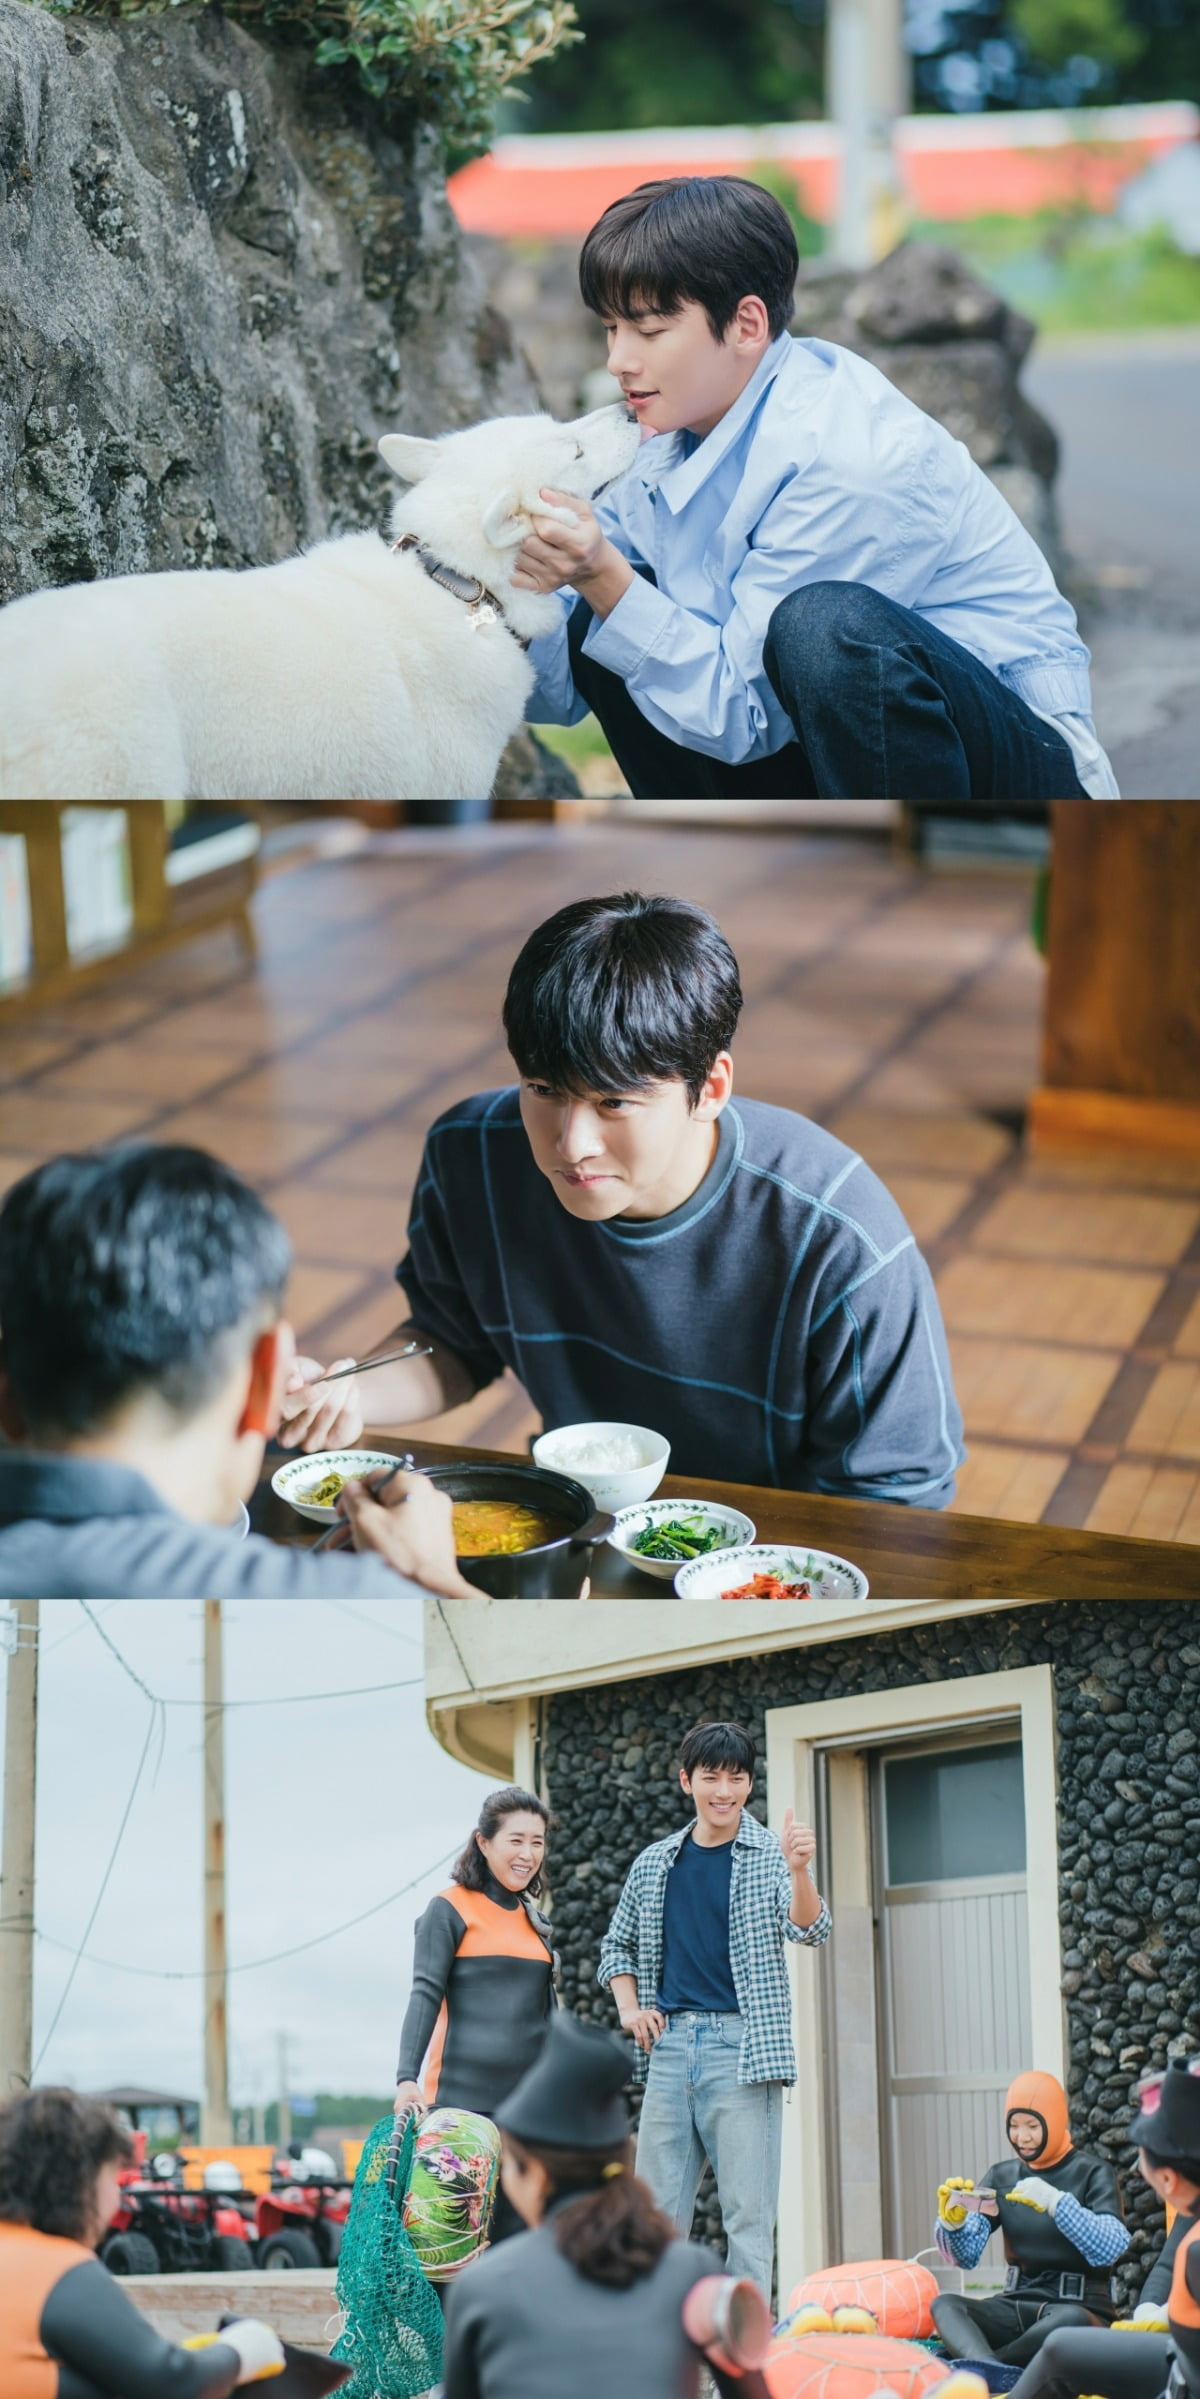 Ji Chang-wook, “A man who is attractive even without being flashy, I put a lot of effort into styling.”